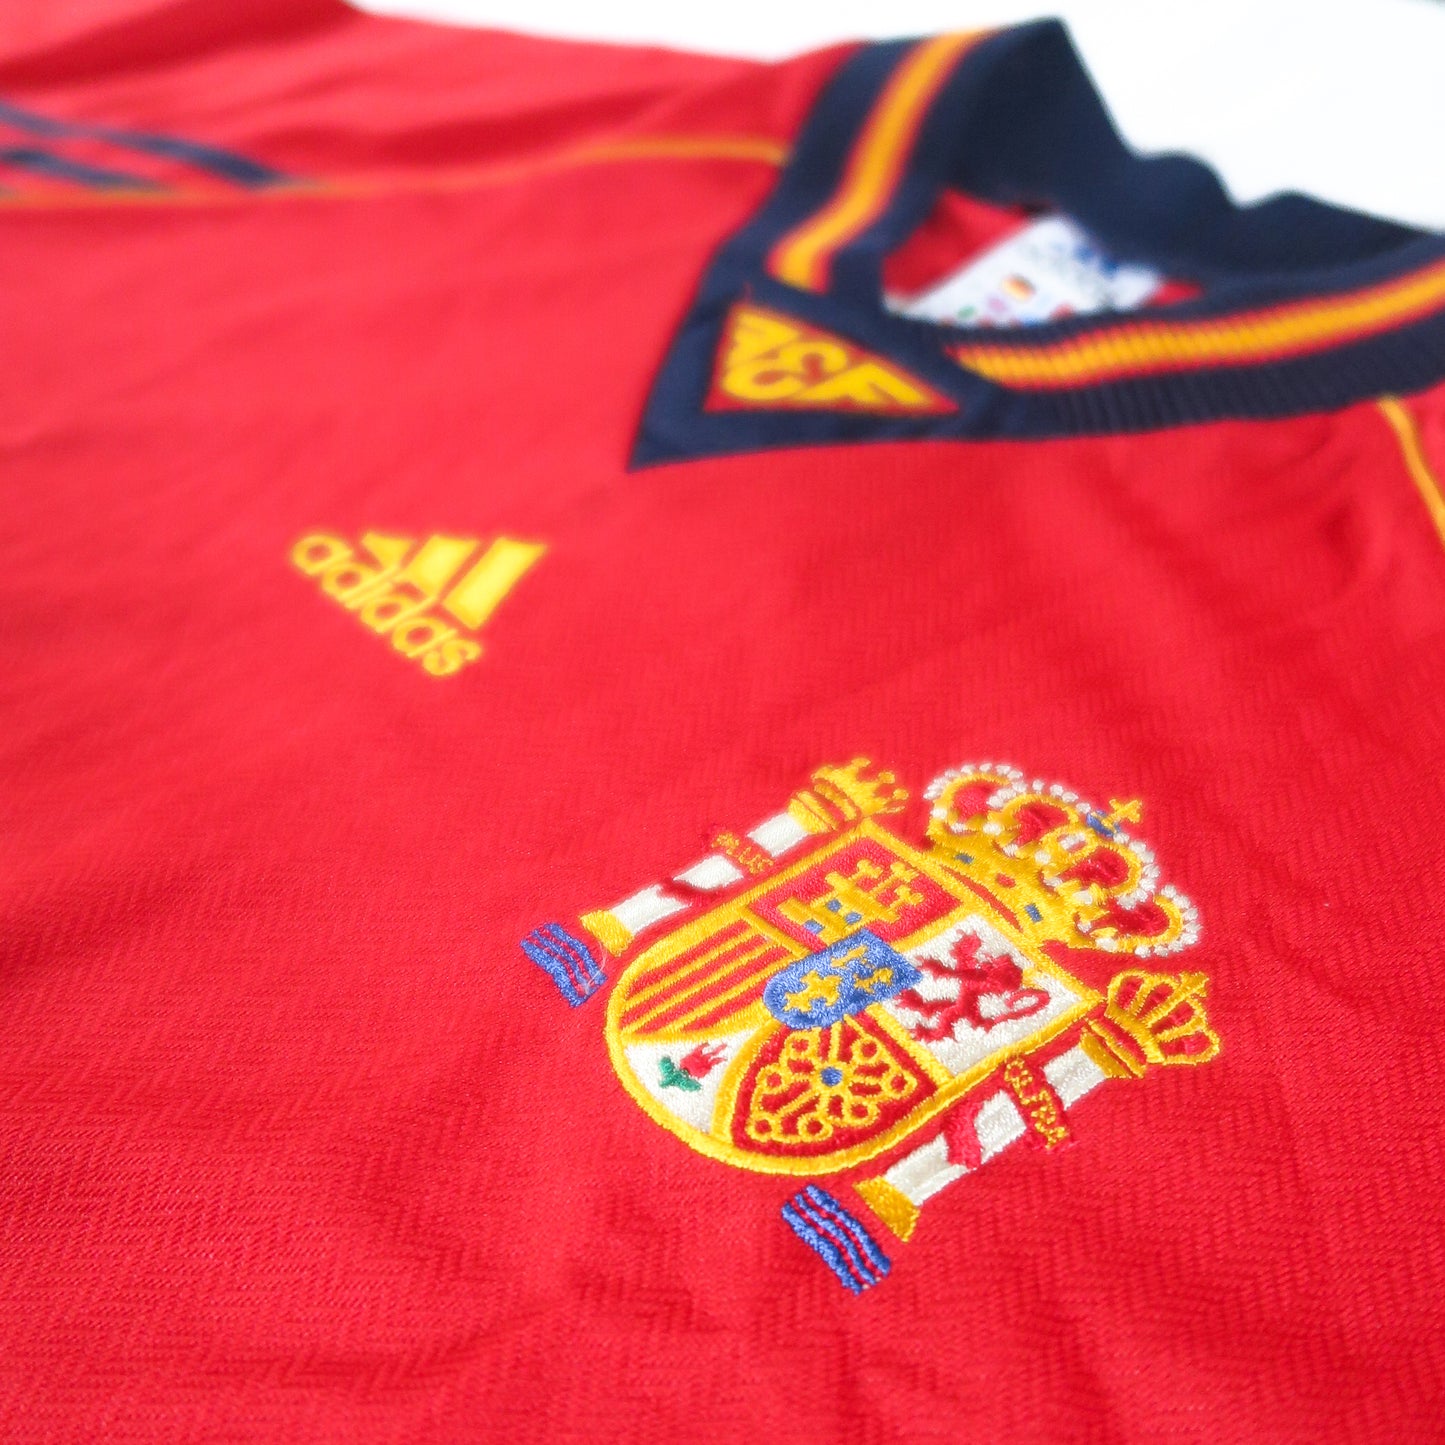 Spain 1998/99 Adidas Home (XL) Brand New With Tags